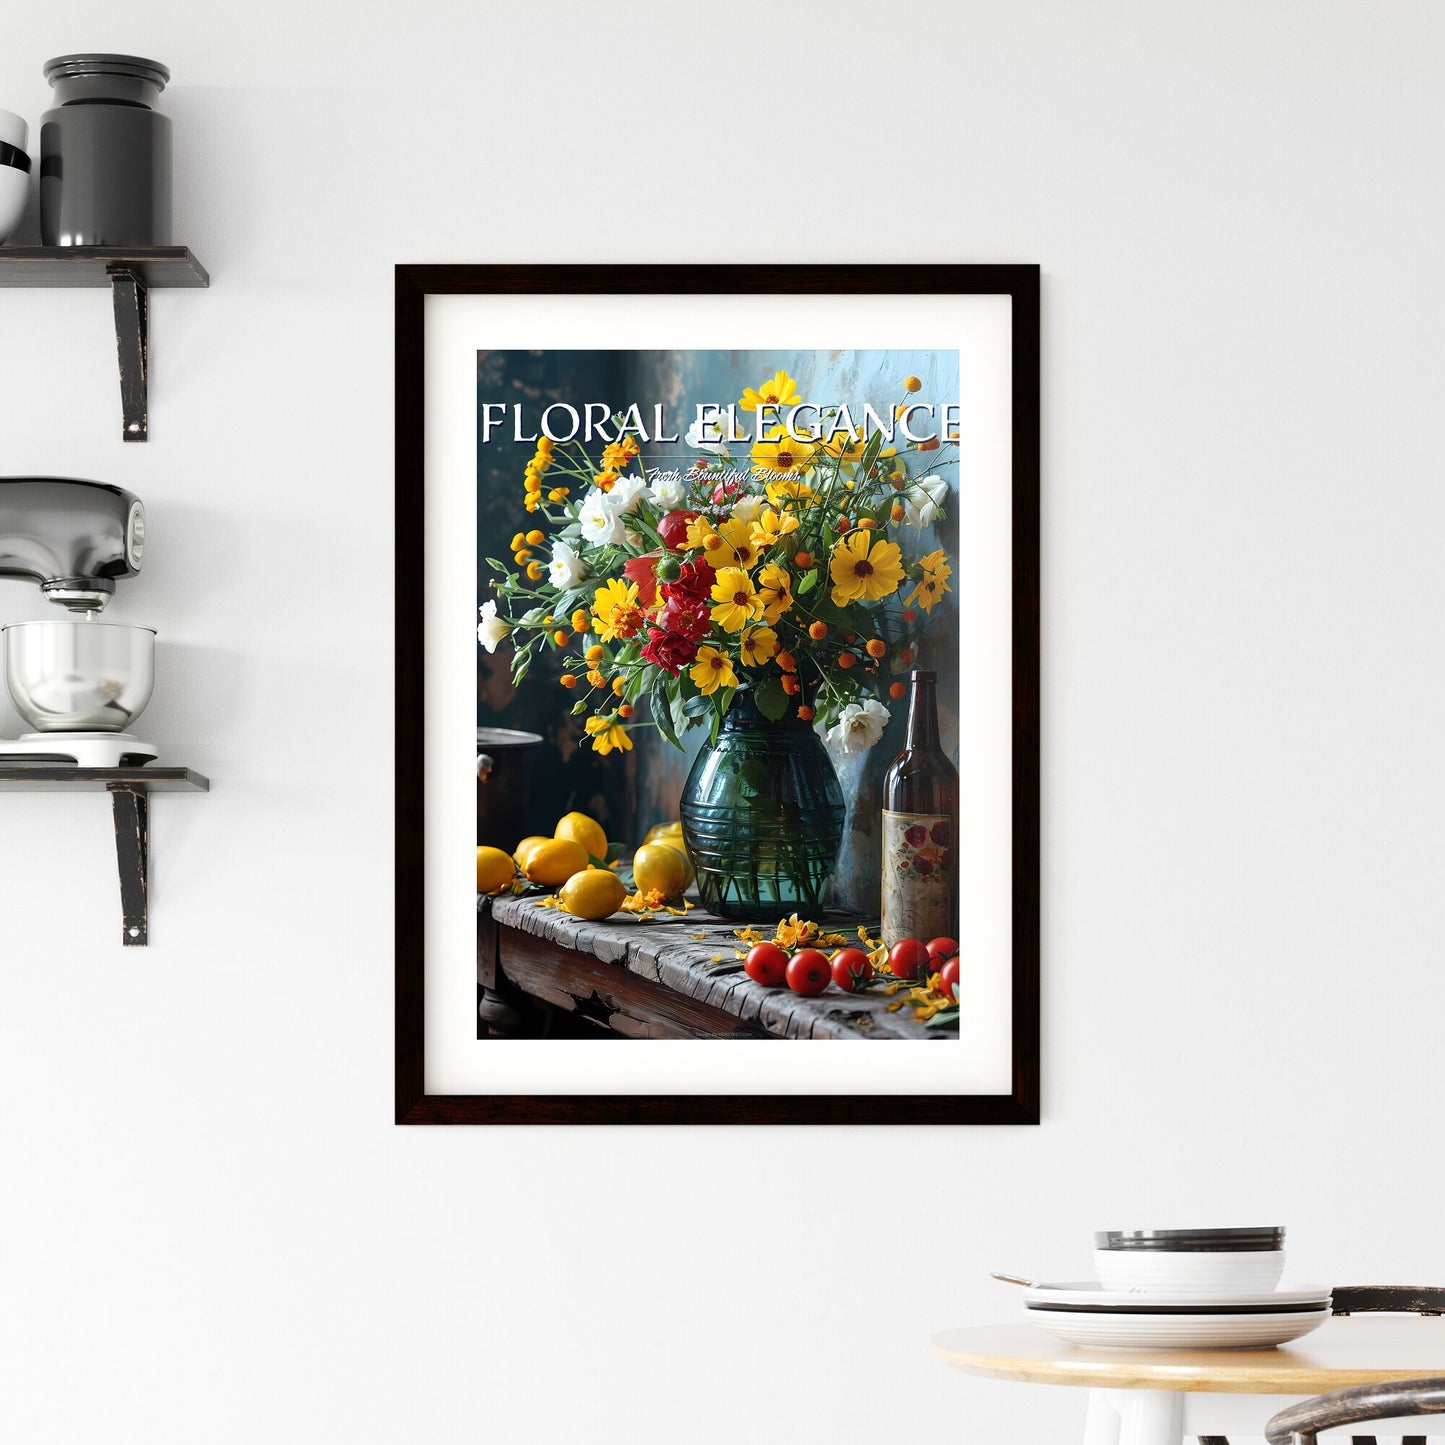 A Poster of impressionistic still life - A Vase Of Flowers And A Bottle Of Wine Default Title